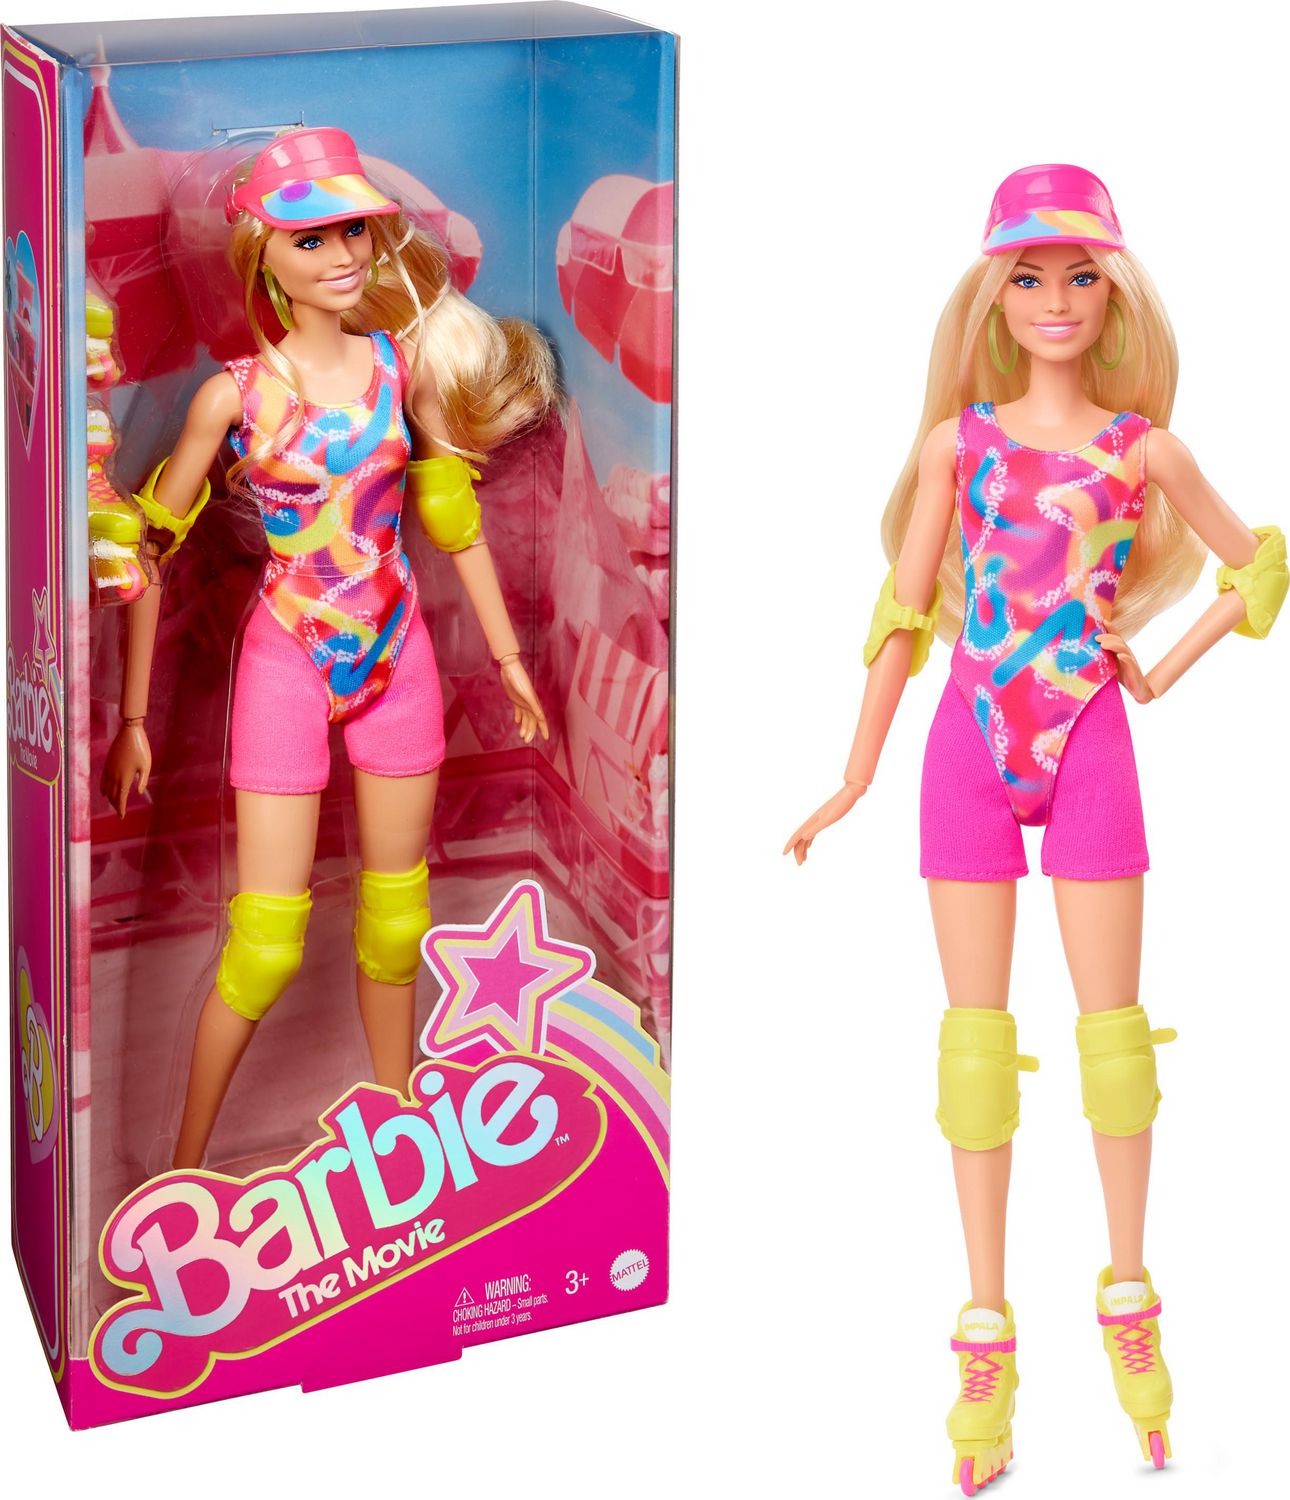 Barbie The Movie Collectible Doll, Margot Robbie as Barbie in